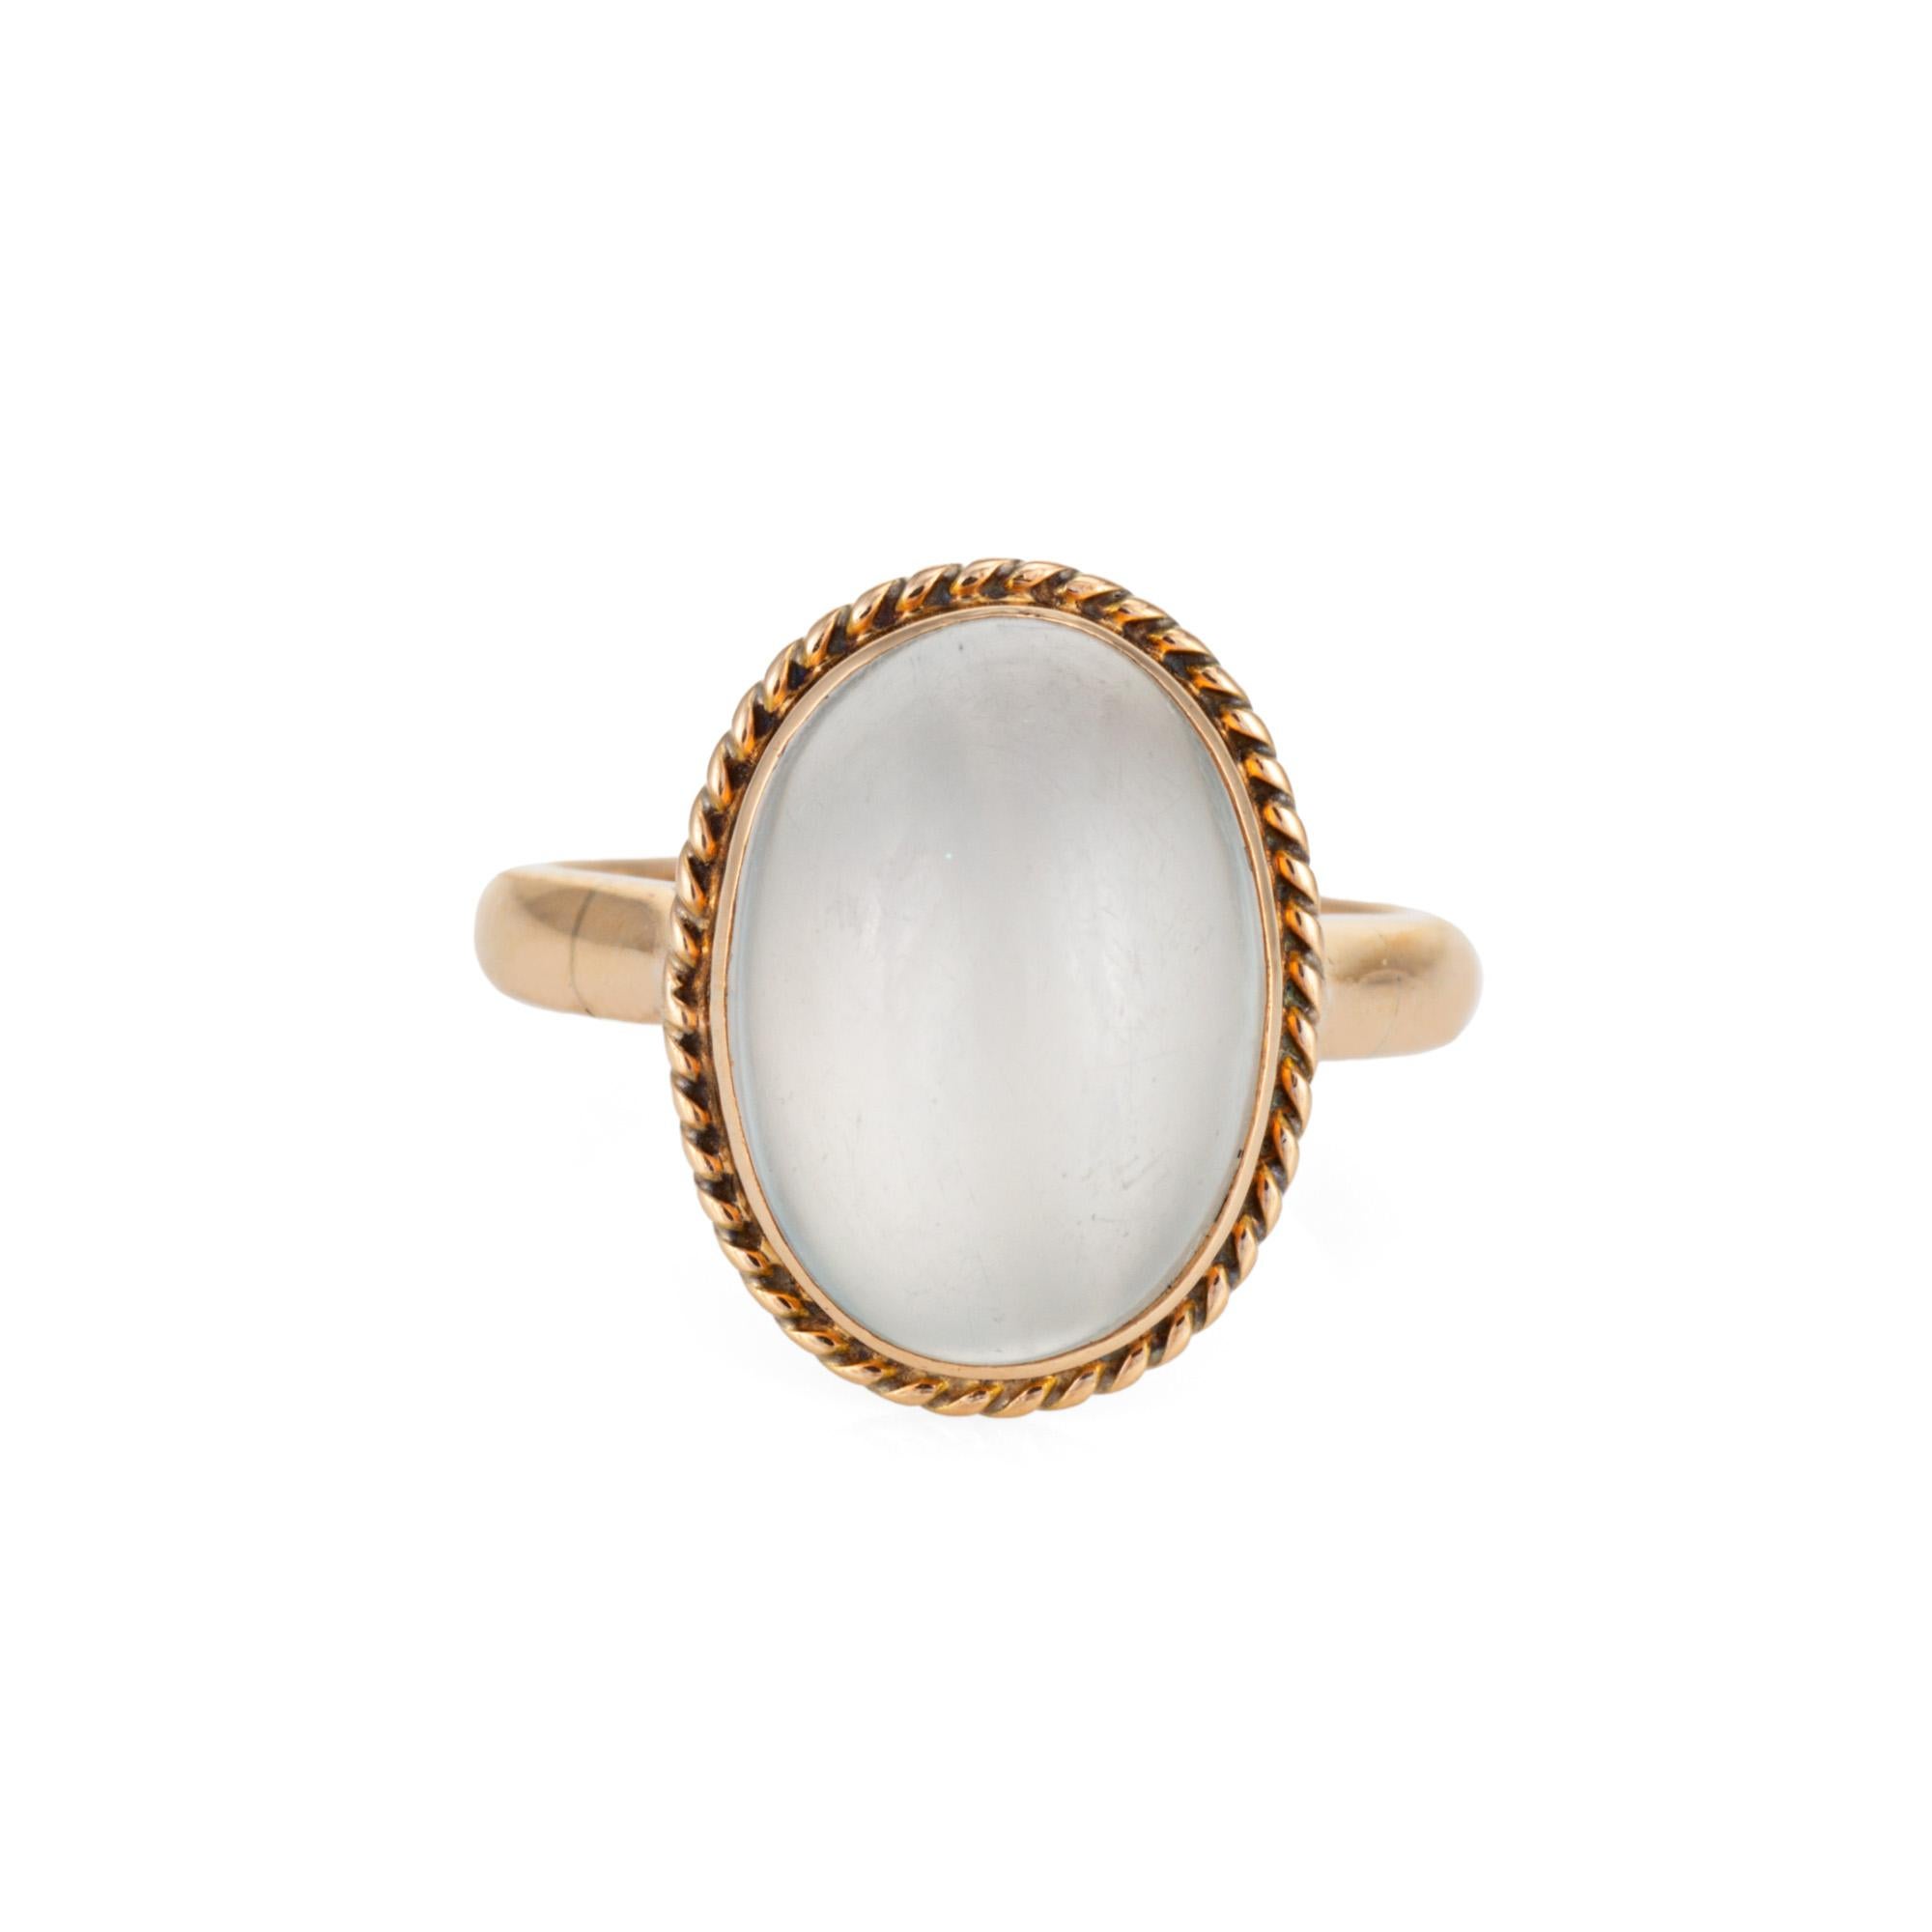 Stylish mid-century moonstone cocktail ring crafted in 18 karat yellow gold. 

Cabochon moonstone measures 12mm x 10mm. The moonstone is in very good condition and free of cracks or chips. 

The beautiful luminous moonstone glows with every movement